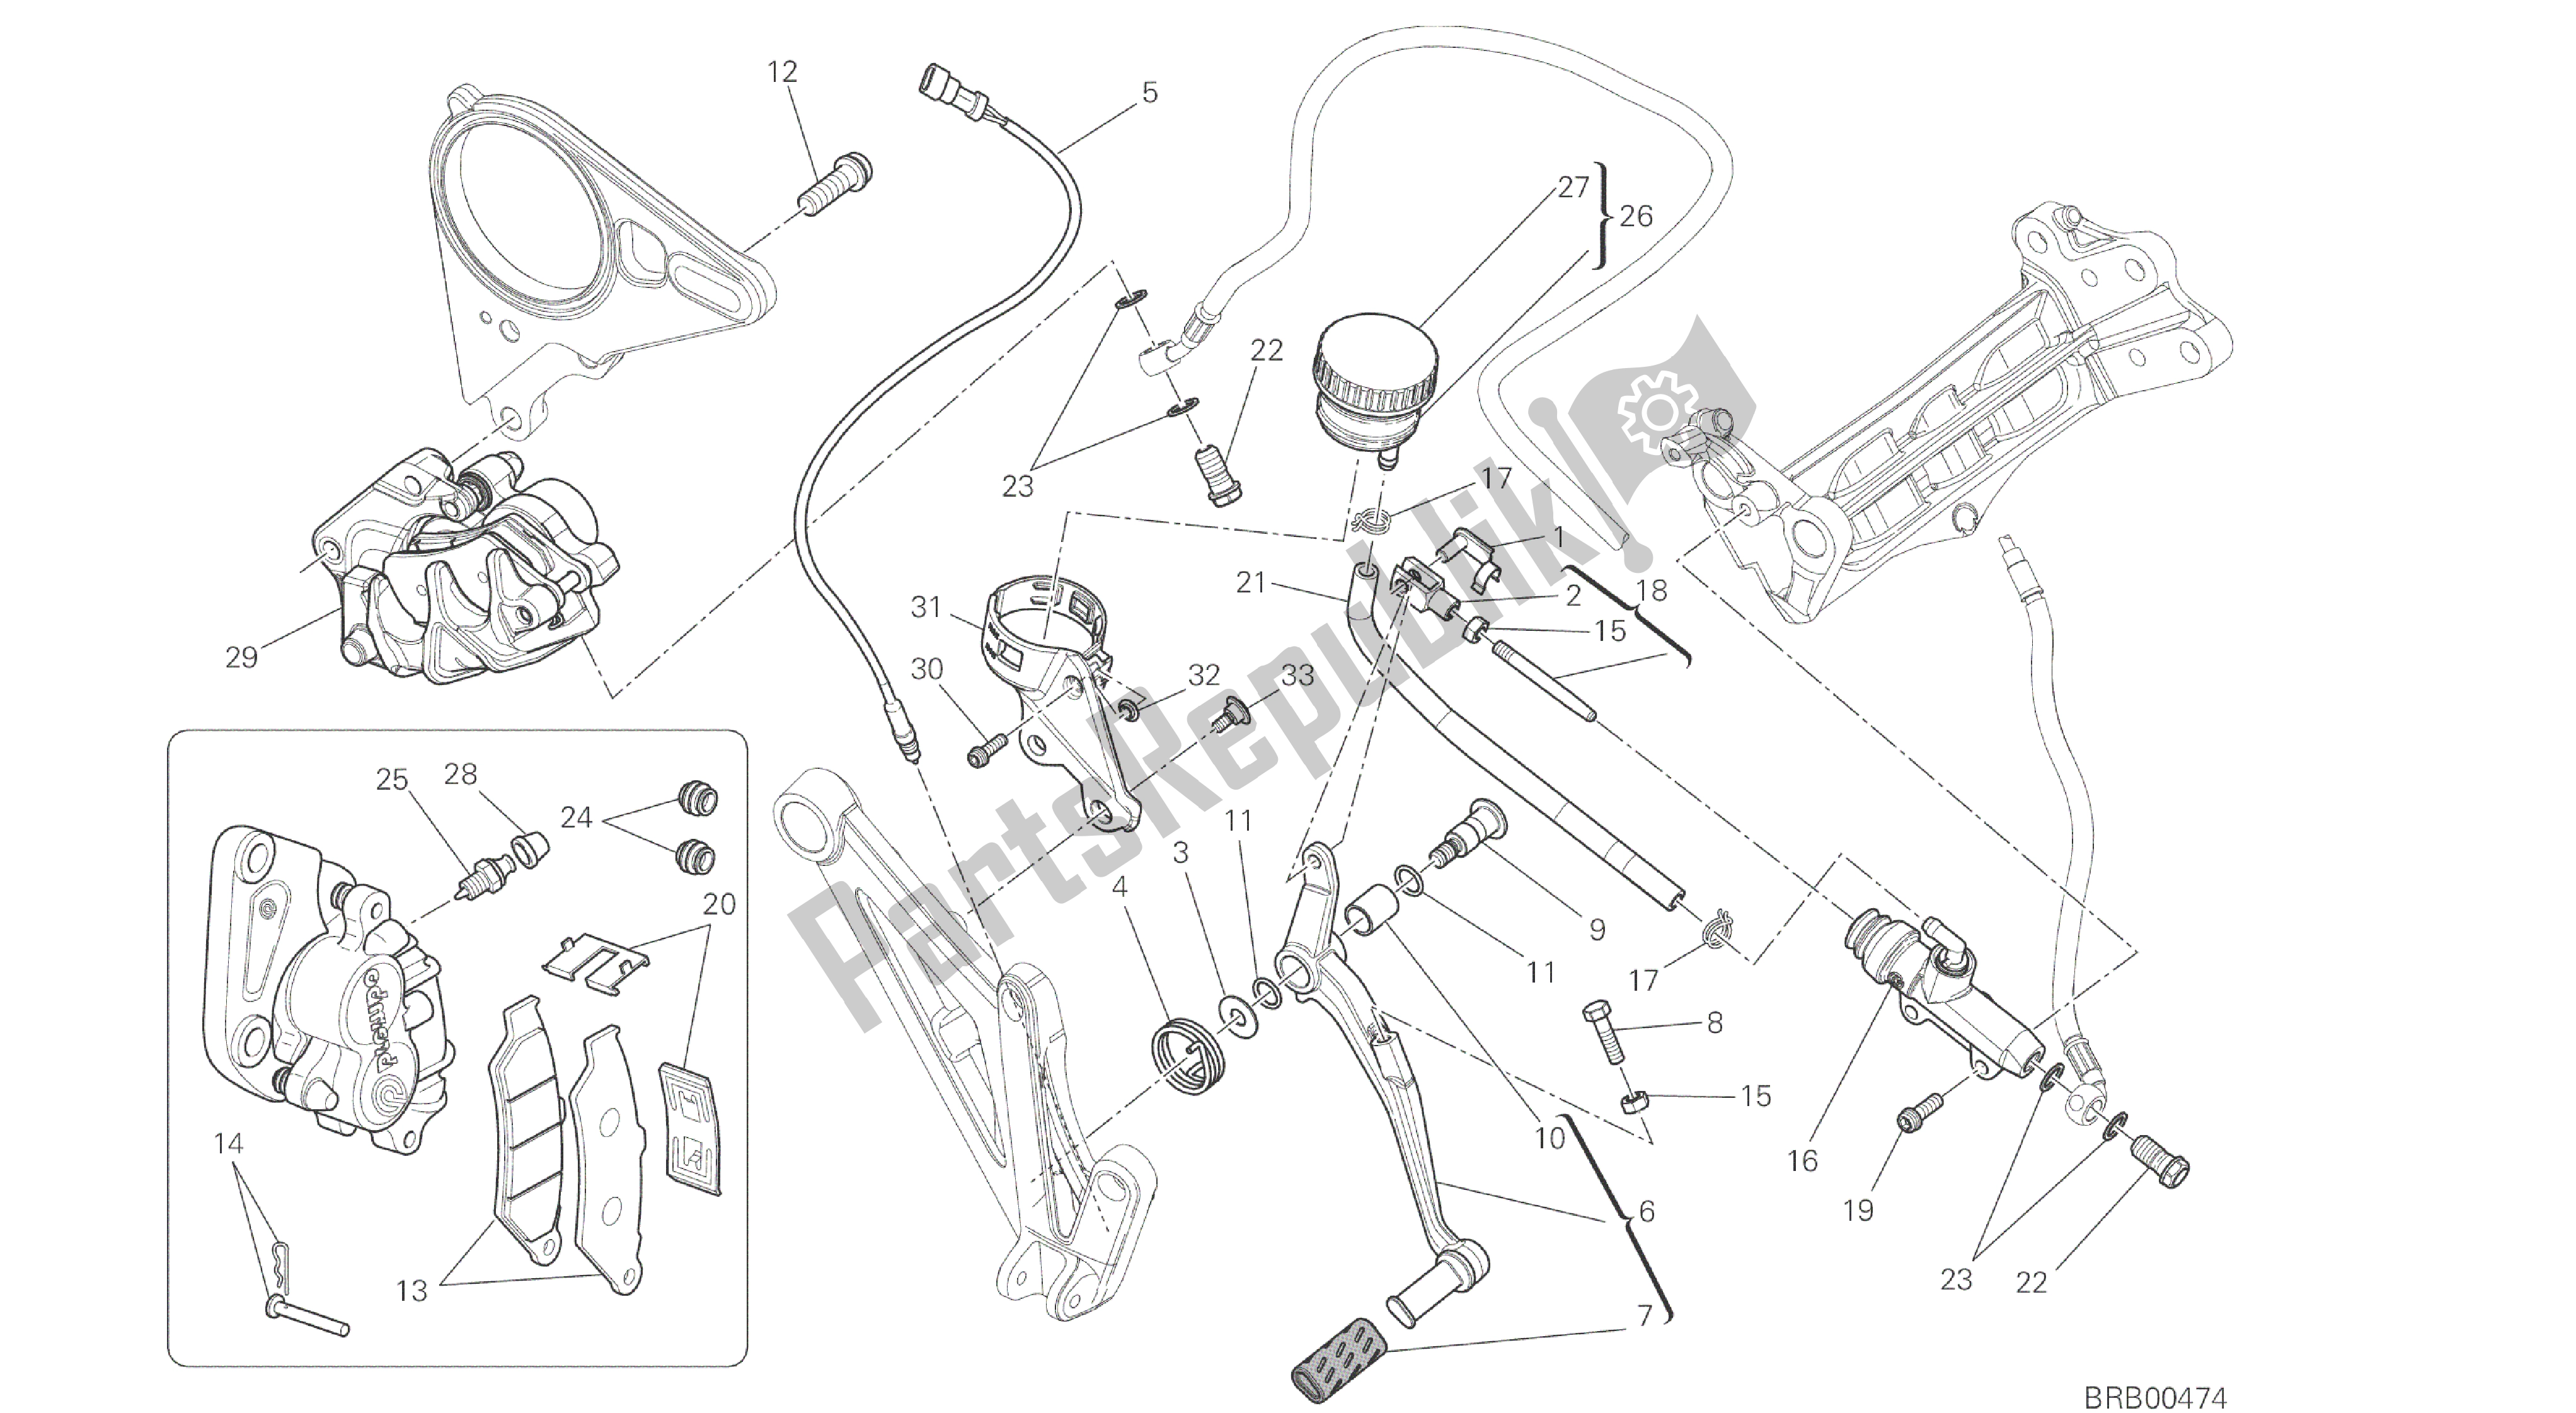 All parts for the Drawing 025 - Rear Brake System [mod:dvl]group Frame of the Ducati Diavel 1200 2016